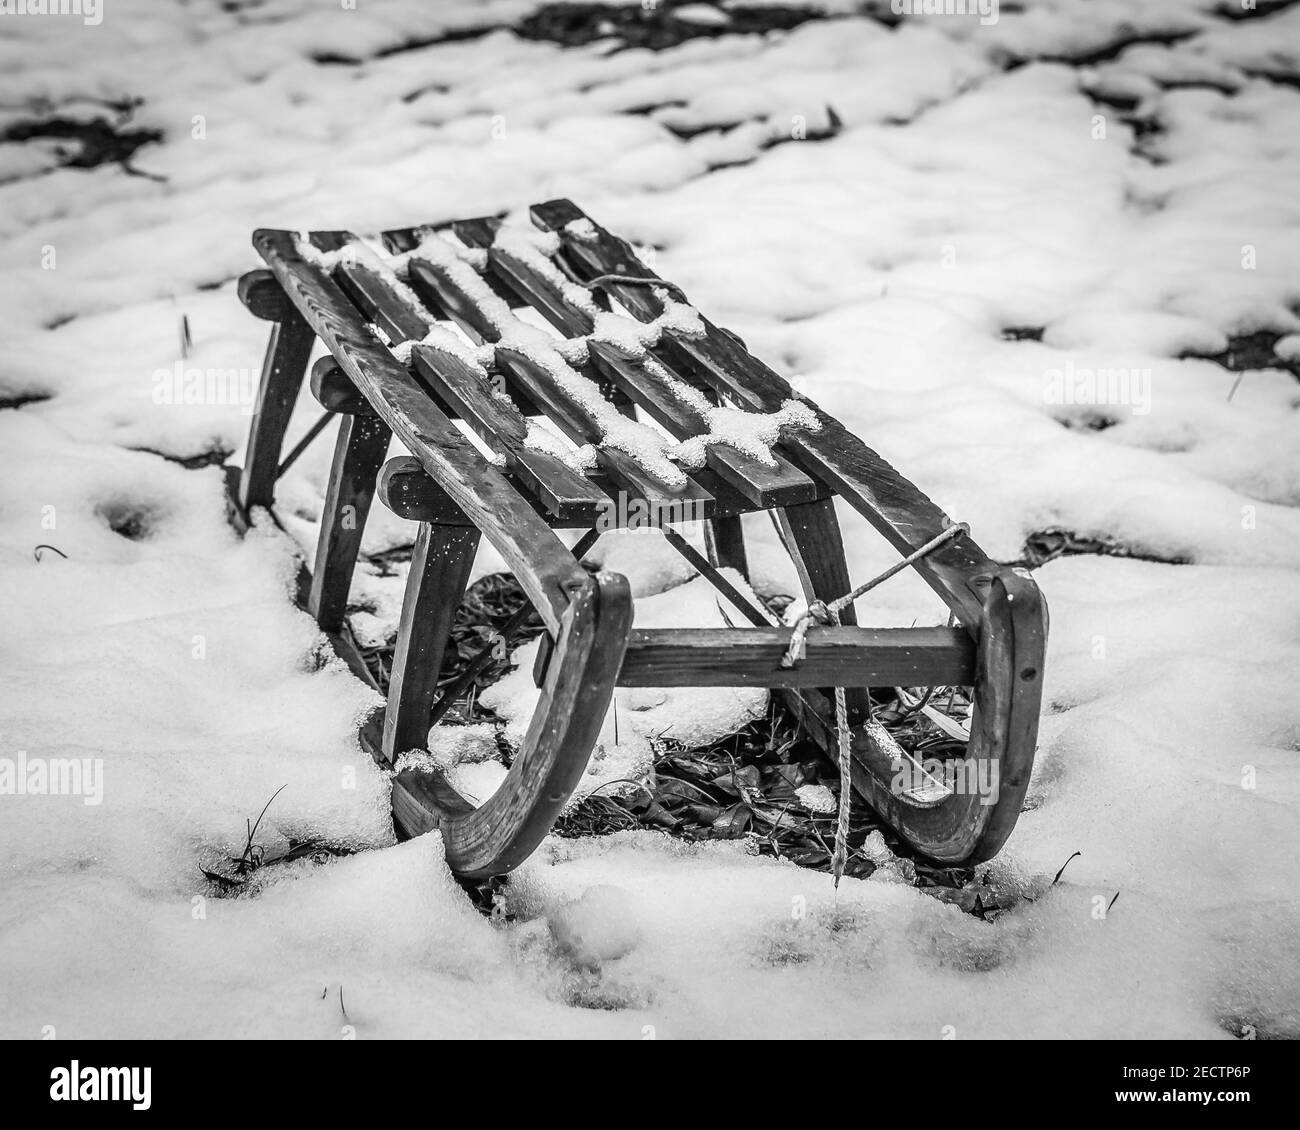 Motor Sled at White Snow Transport Stock Image - Image of winter, snow:  27045633